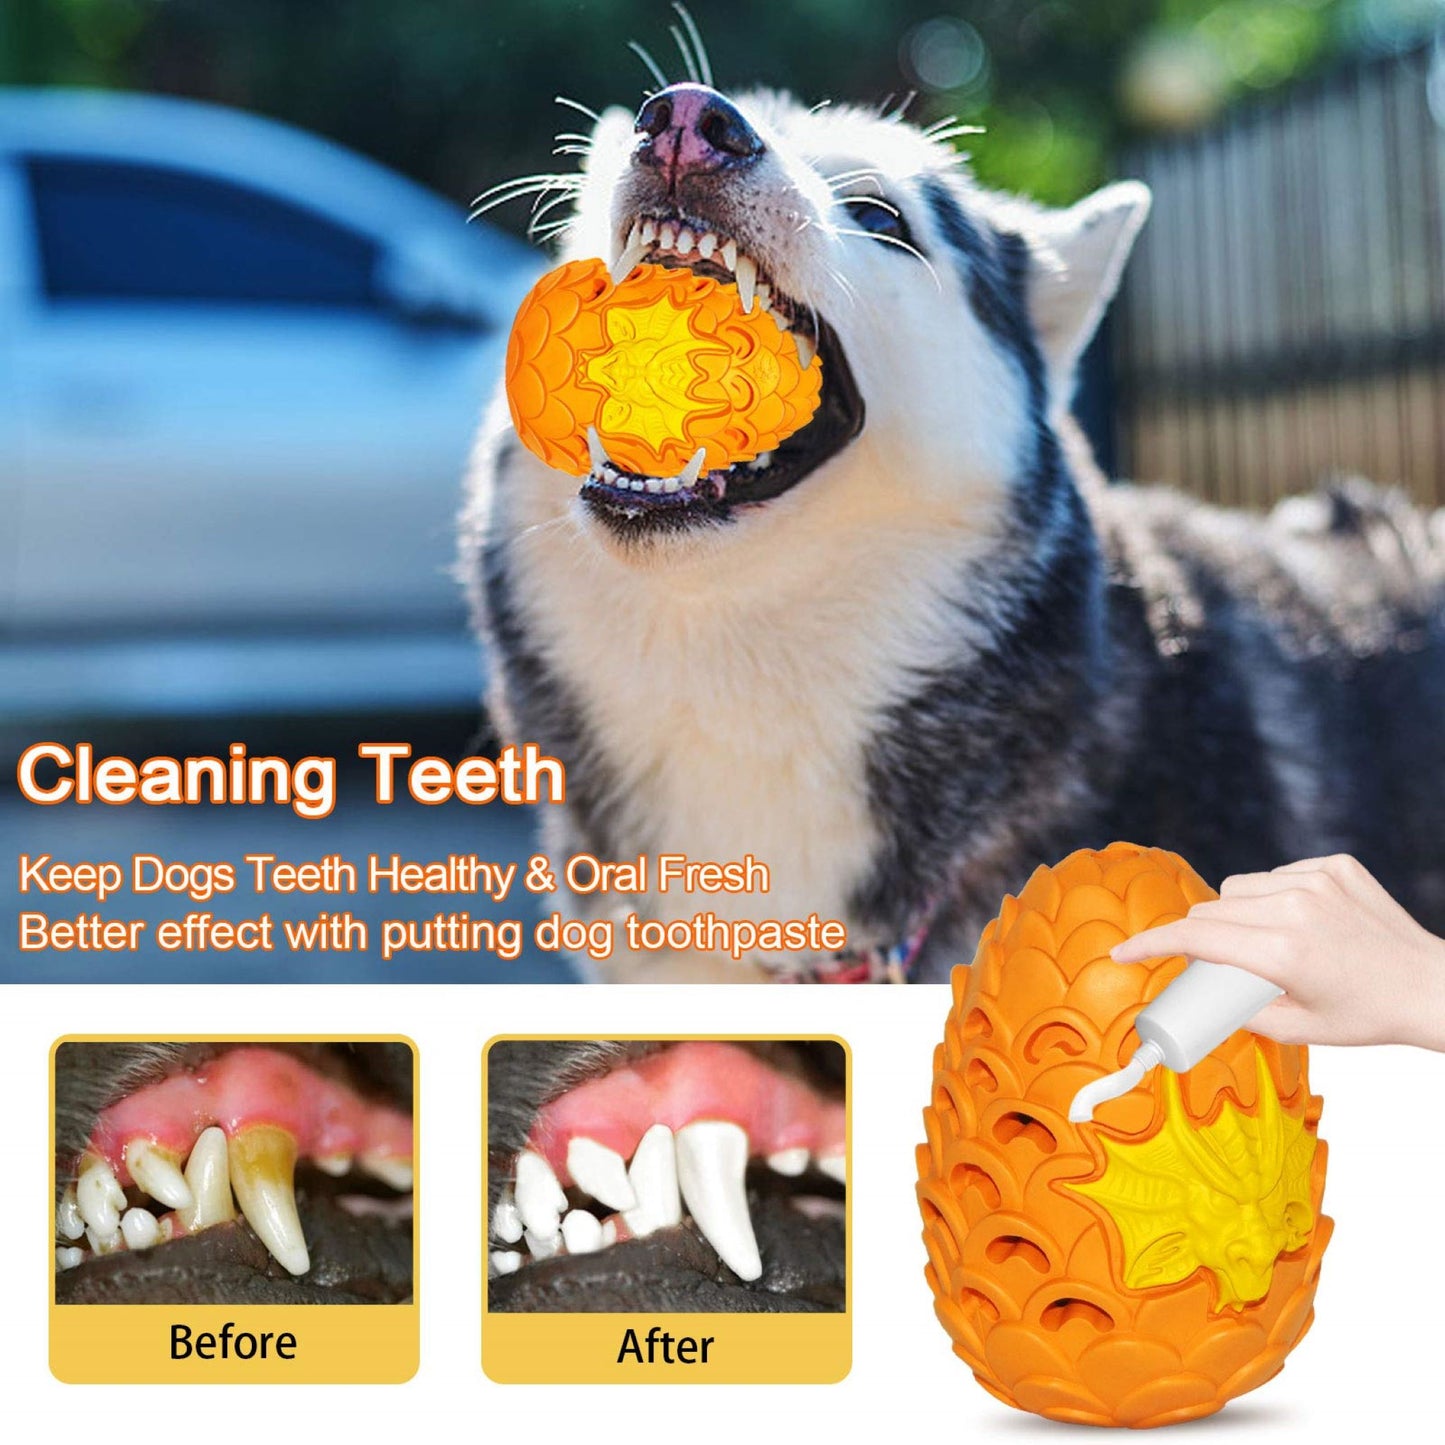 ROYAL PETS USA Indestructible, Durable & Tough Dragon Egg Dog Chew Toy for Aggressive Chewers, Slow Treat Dispensing Interactive Toys for S,M & L Breed - 100% NATURAL RUBBER -10000 BITES TESTED - UNIQUE DESIGN FOR ORAL CARE